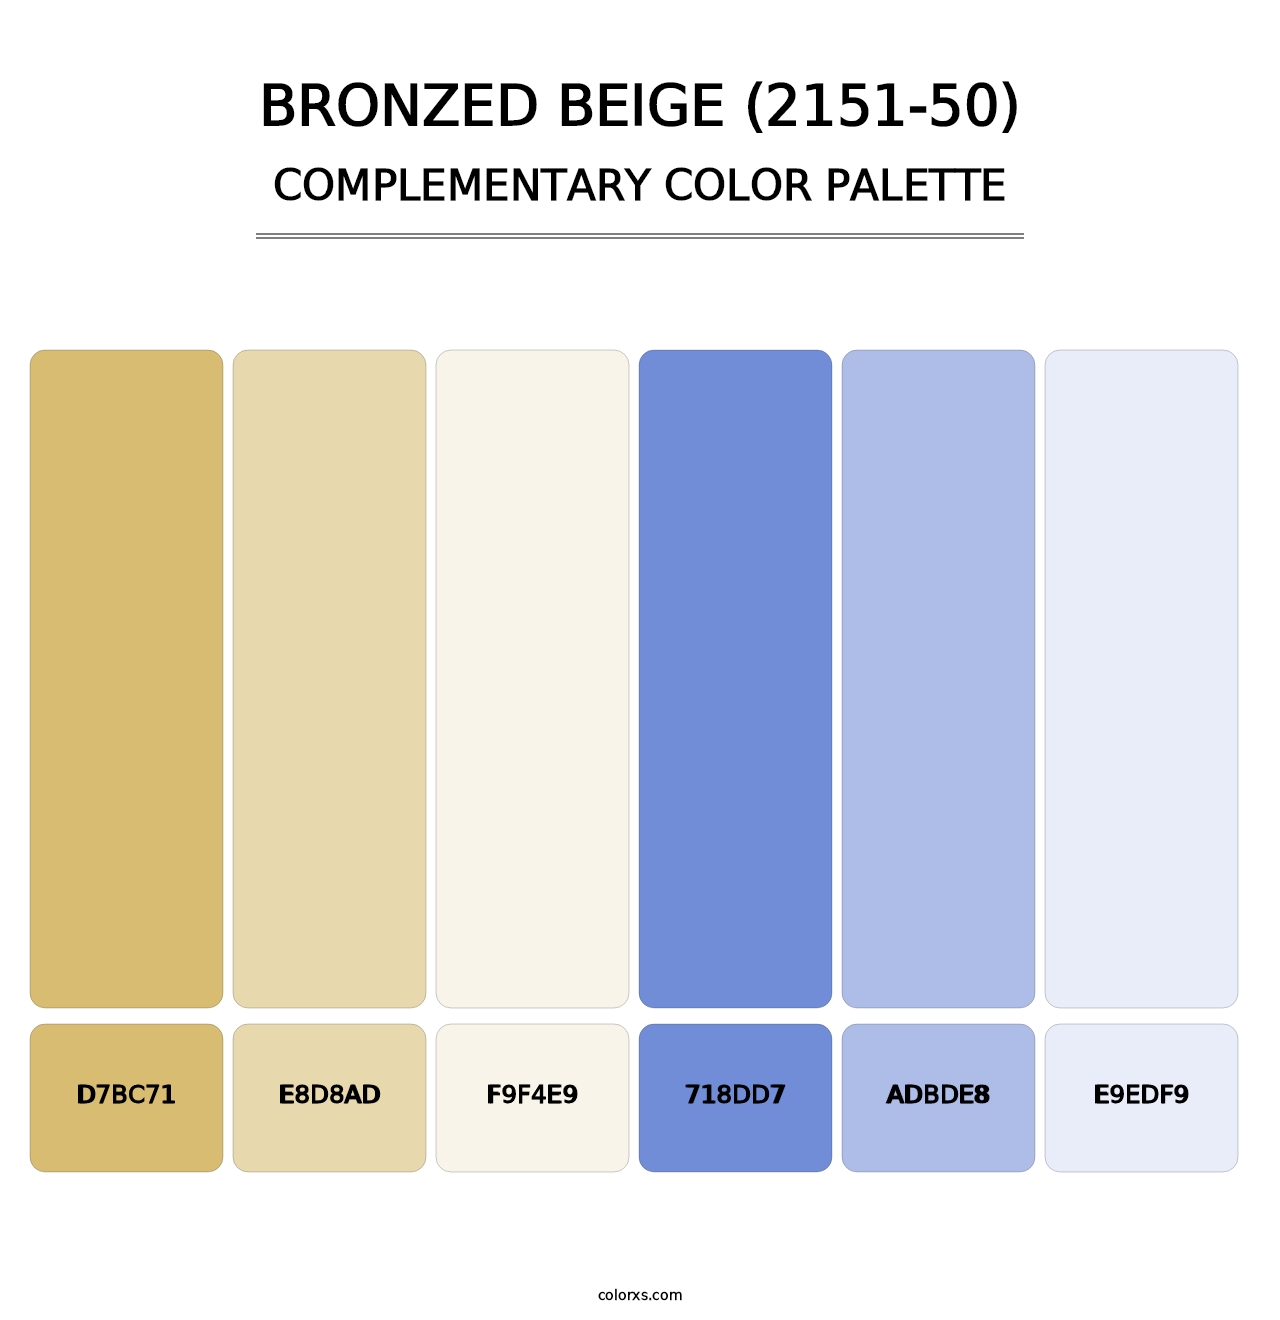 Bronzed Beige (2151-50) - Complementary Color Palette